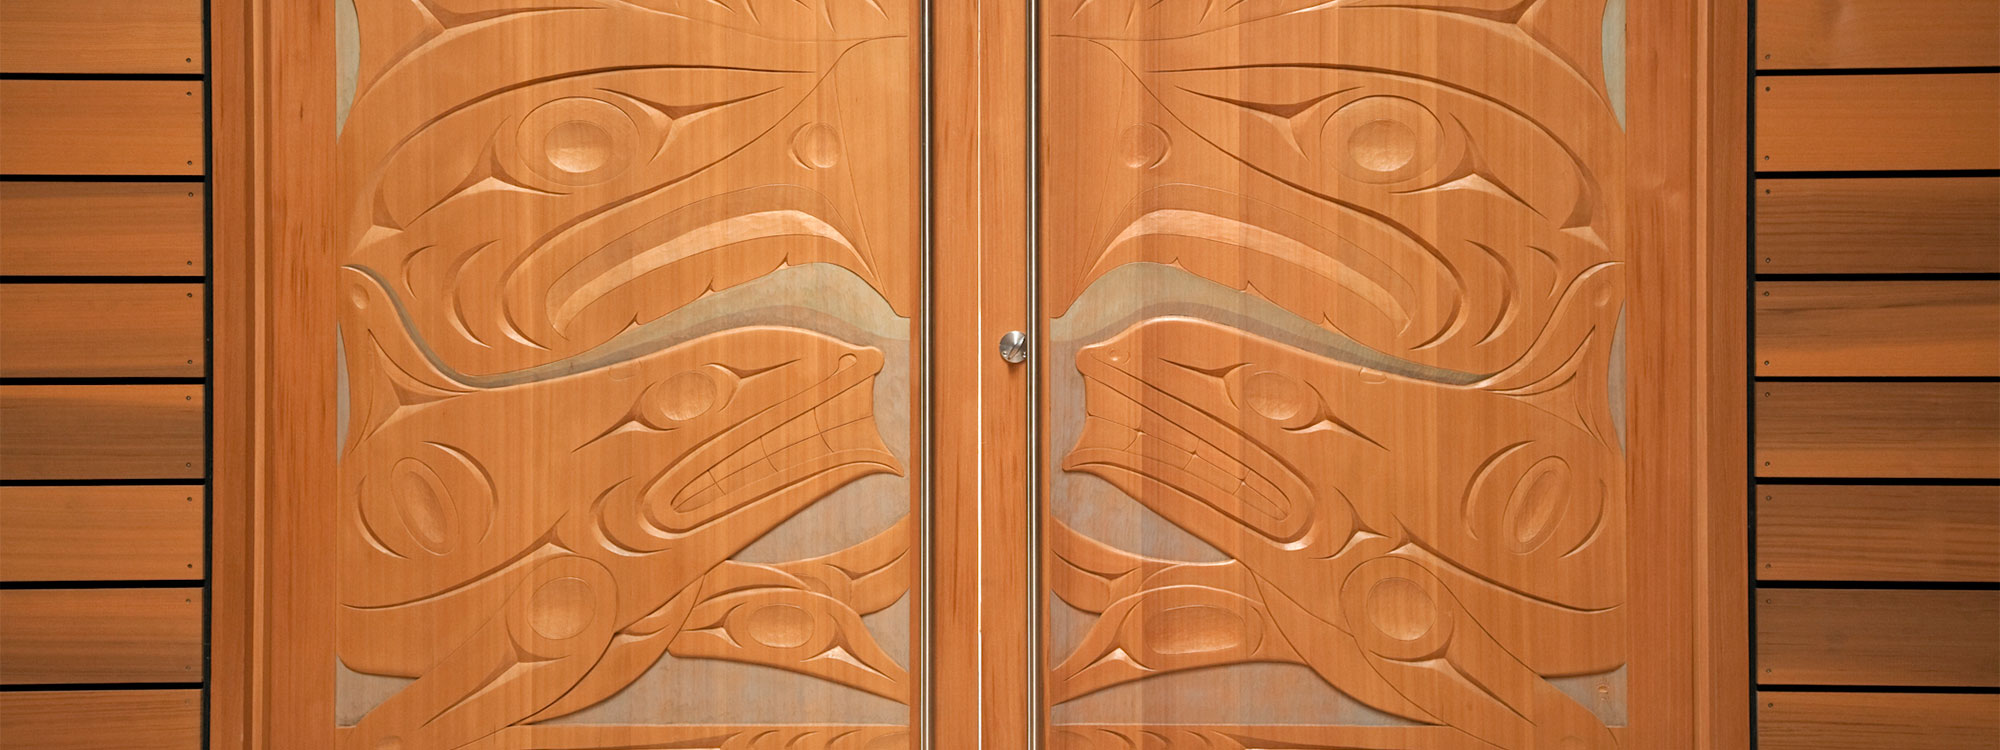 Xwa Lack Tun’s (Rick Harry) carved doors to the Ceremonial Hall in the First Peoples House at the University of Victoria.